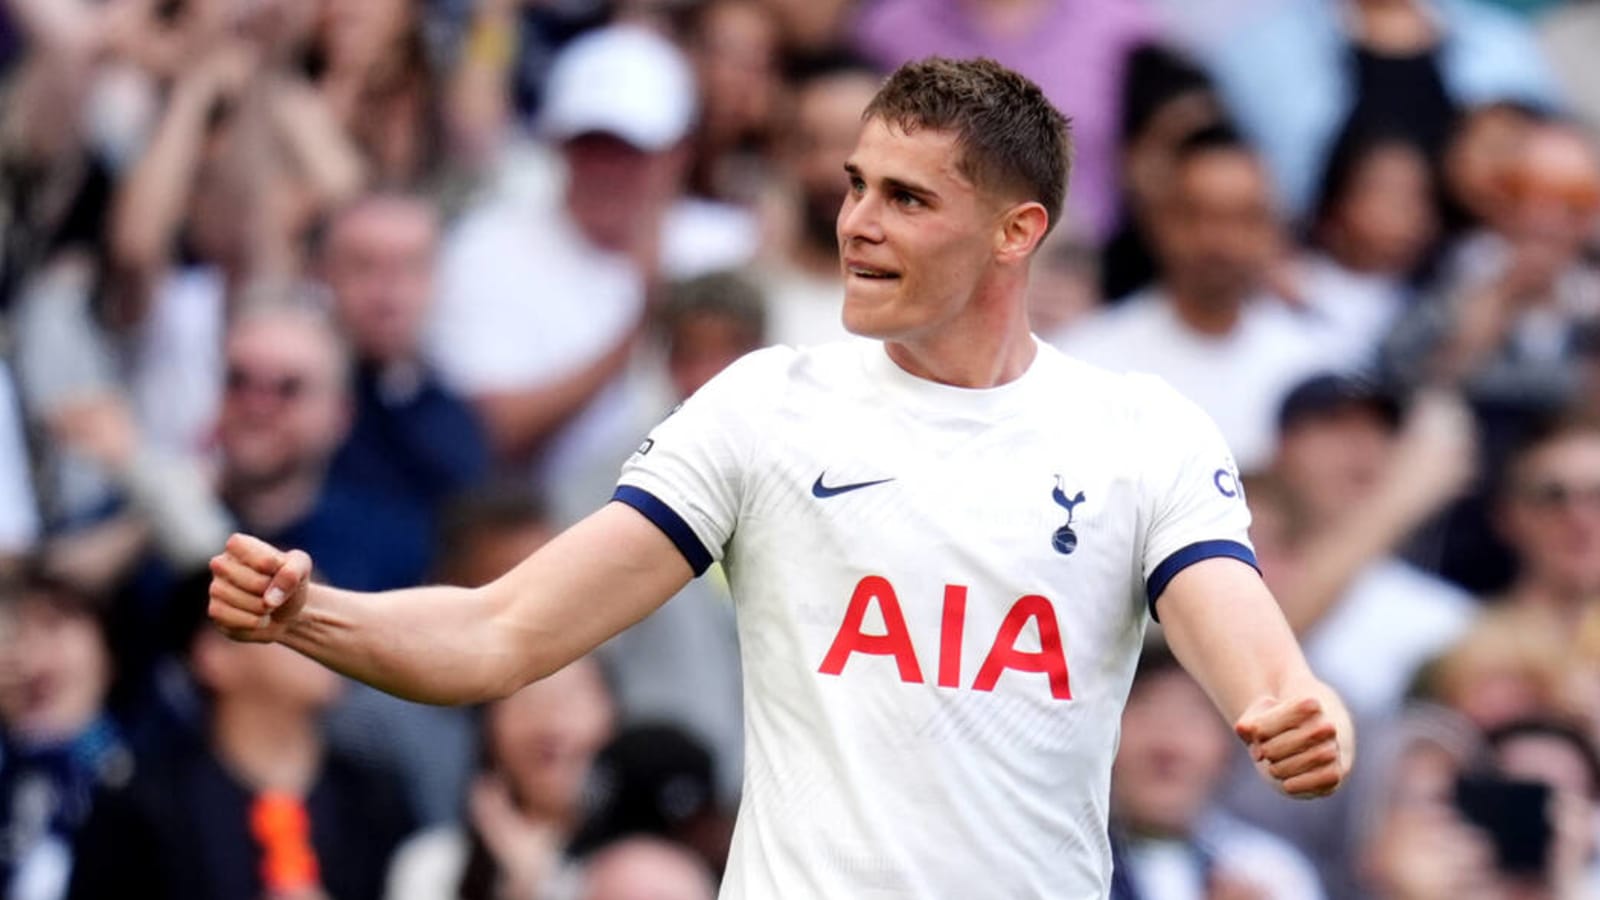 Watch: Micky van de Ven stuns everyone with a brilliant goal to give Tottenham a 2-1 lead against Burnley